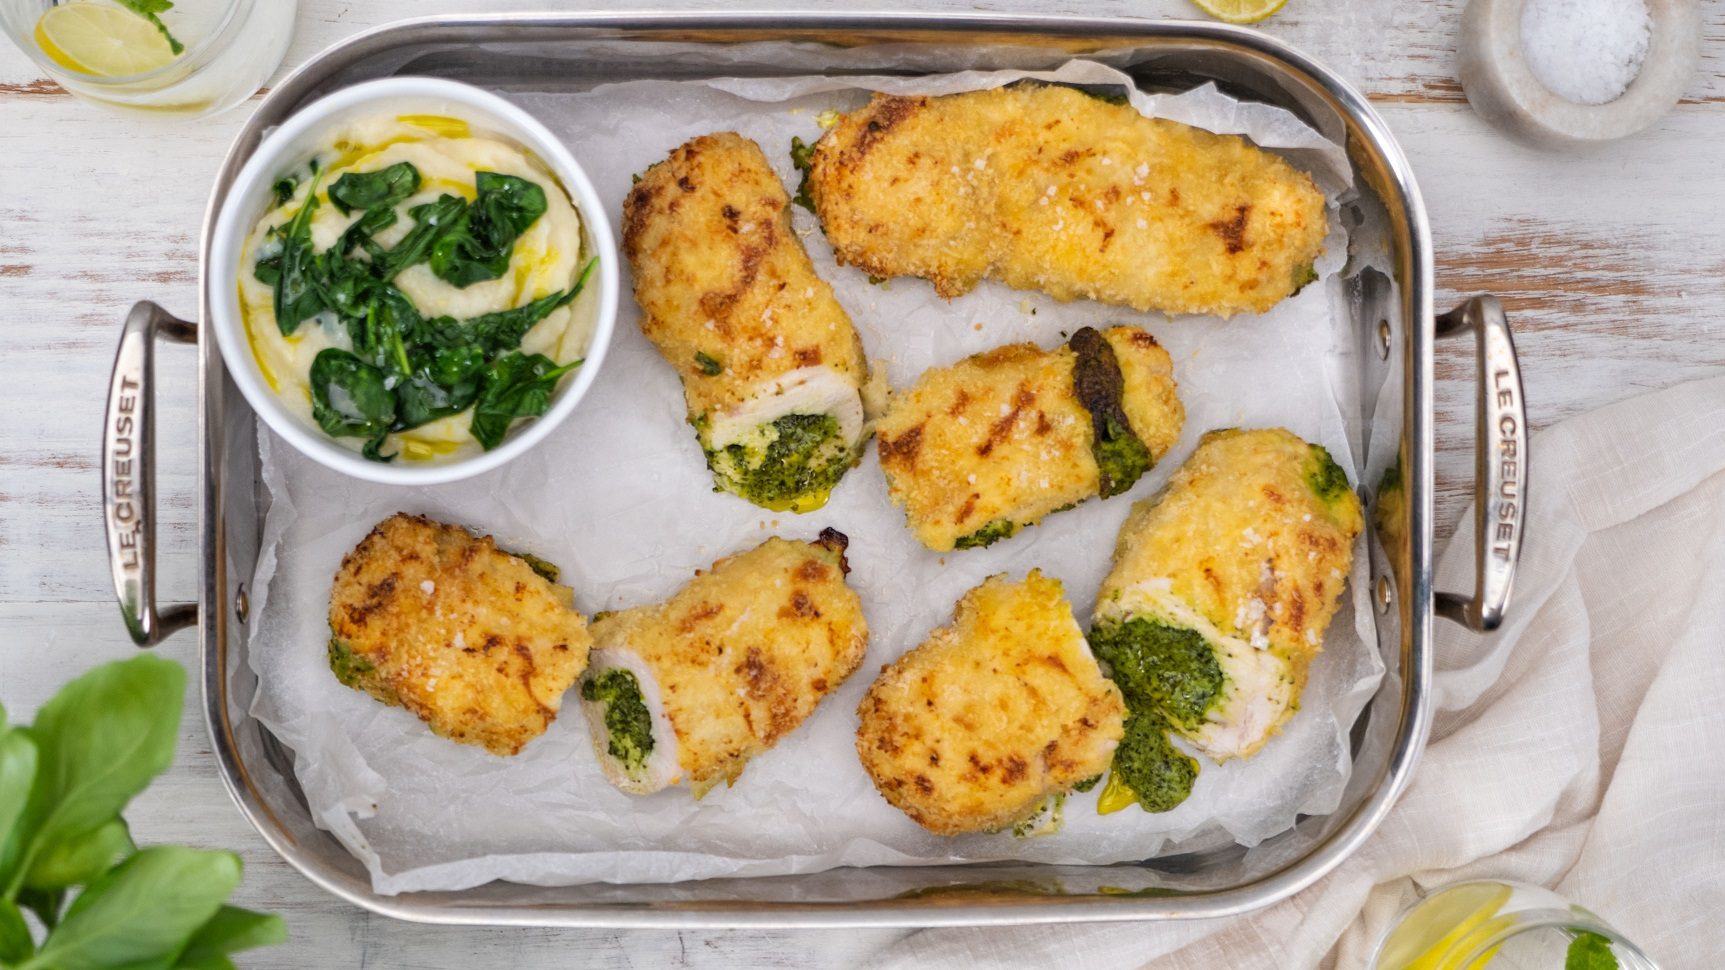 Chicken Kiev rolls with spinach and cheese filling served on a Le Creuset baking tray with a side of potato mash and steamed greens